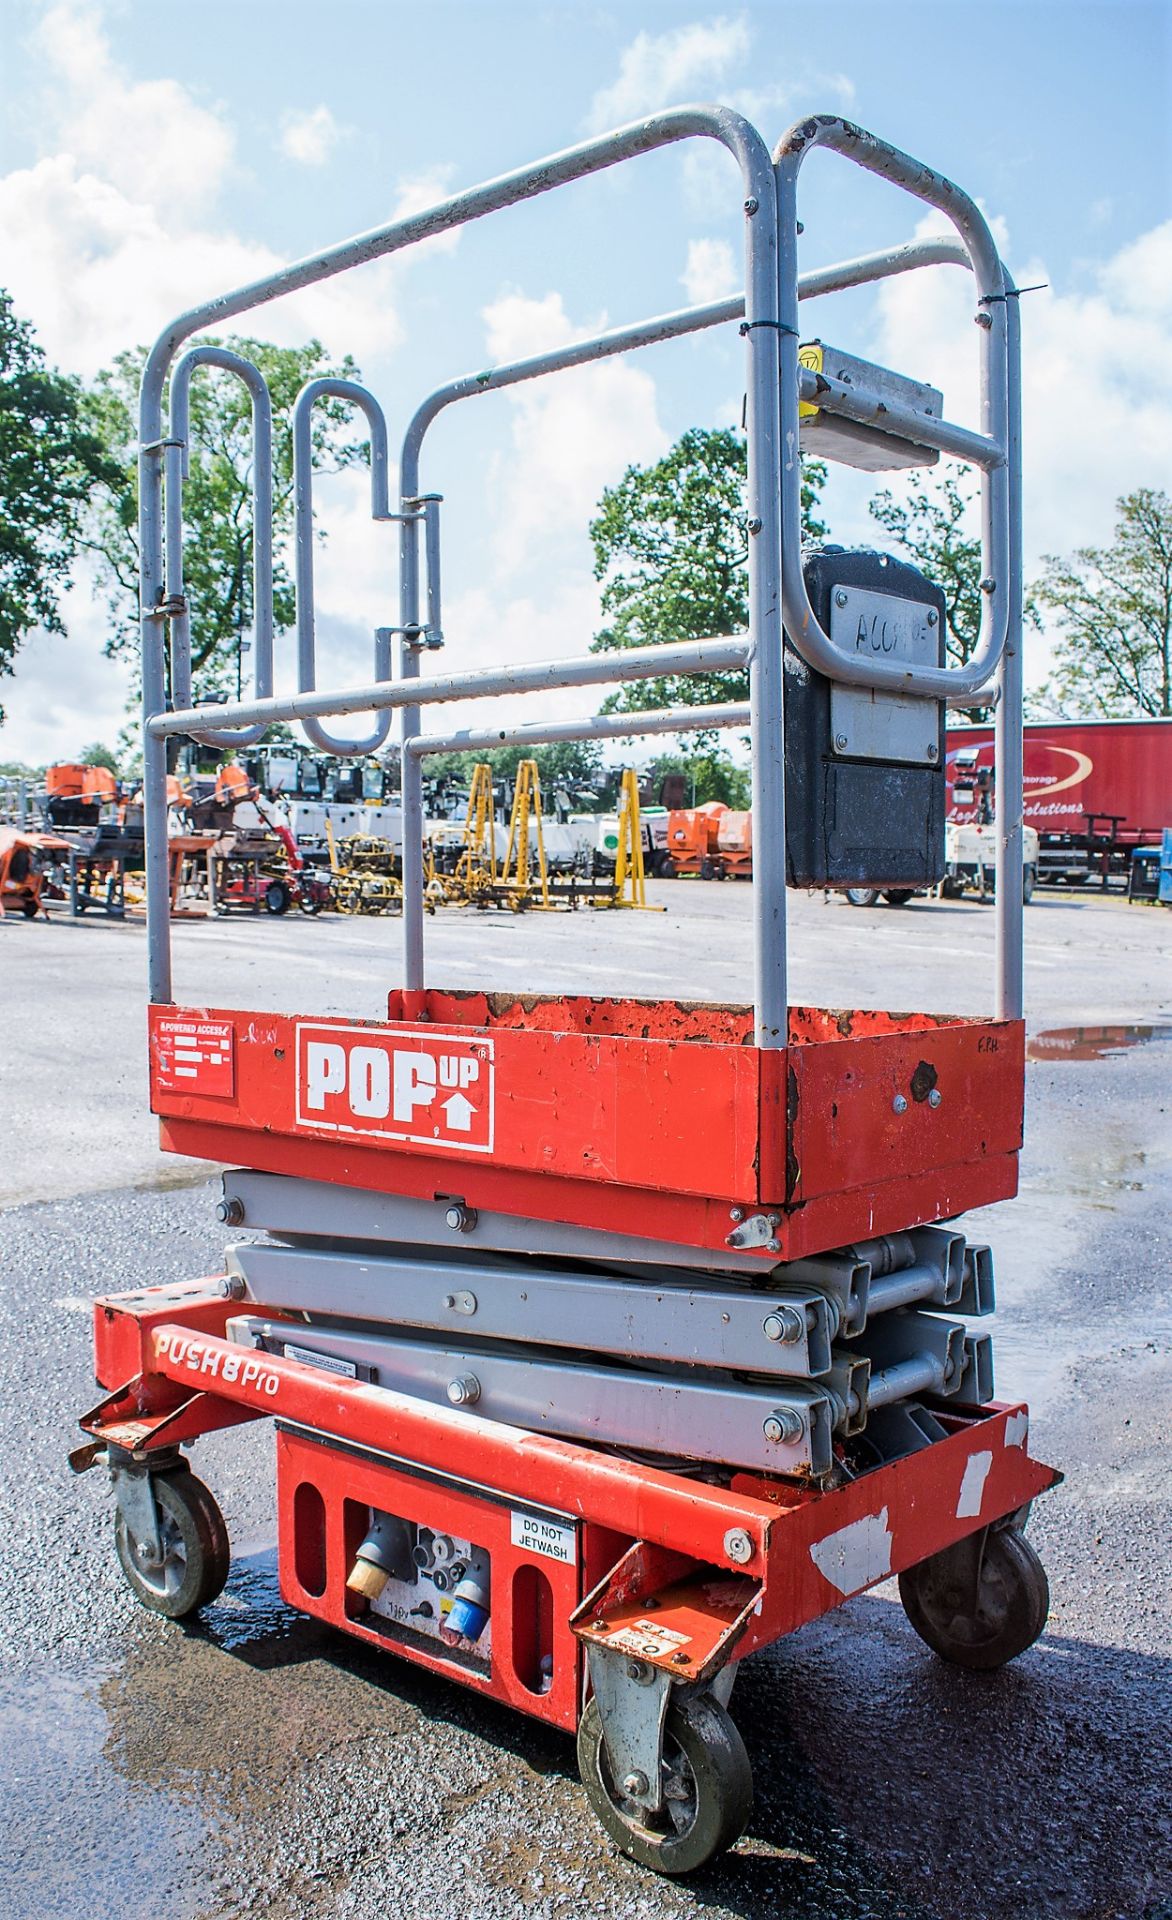 Pop Up Push Pro 8 battery electric push around access platform A609993 - Image 2 of 4